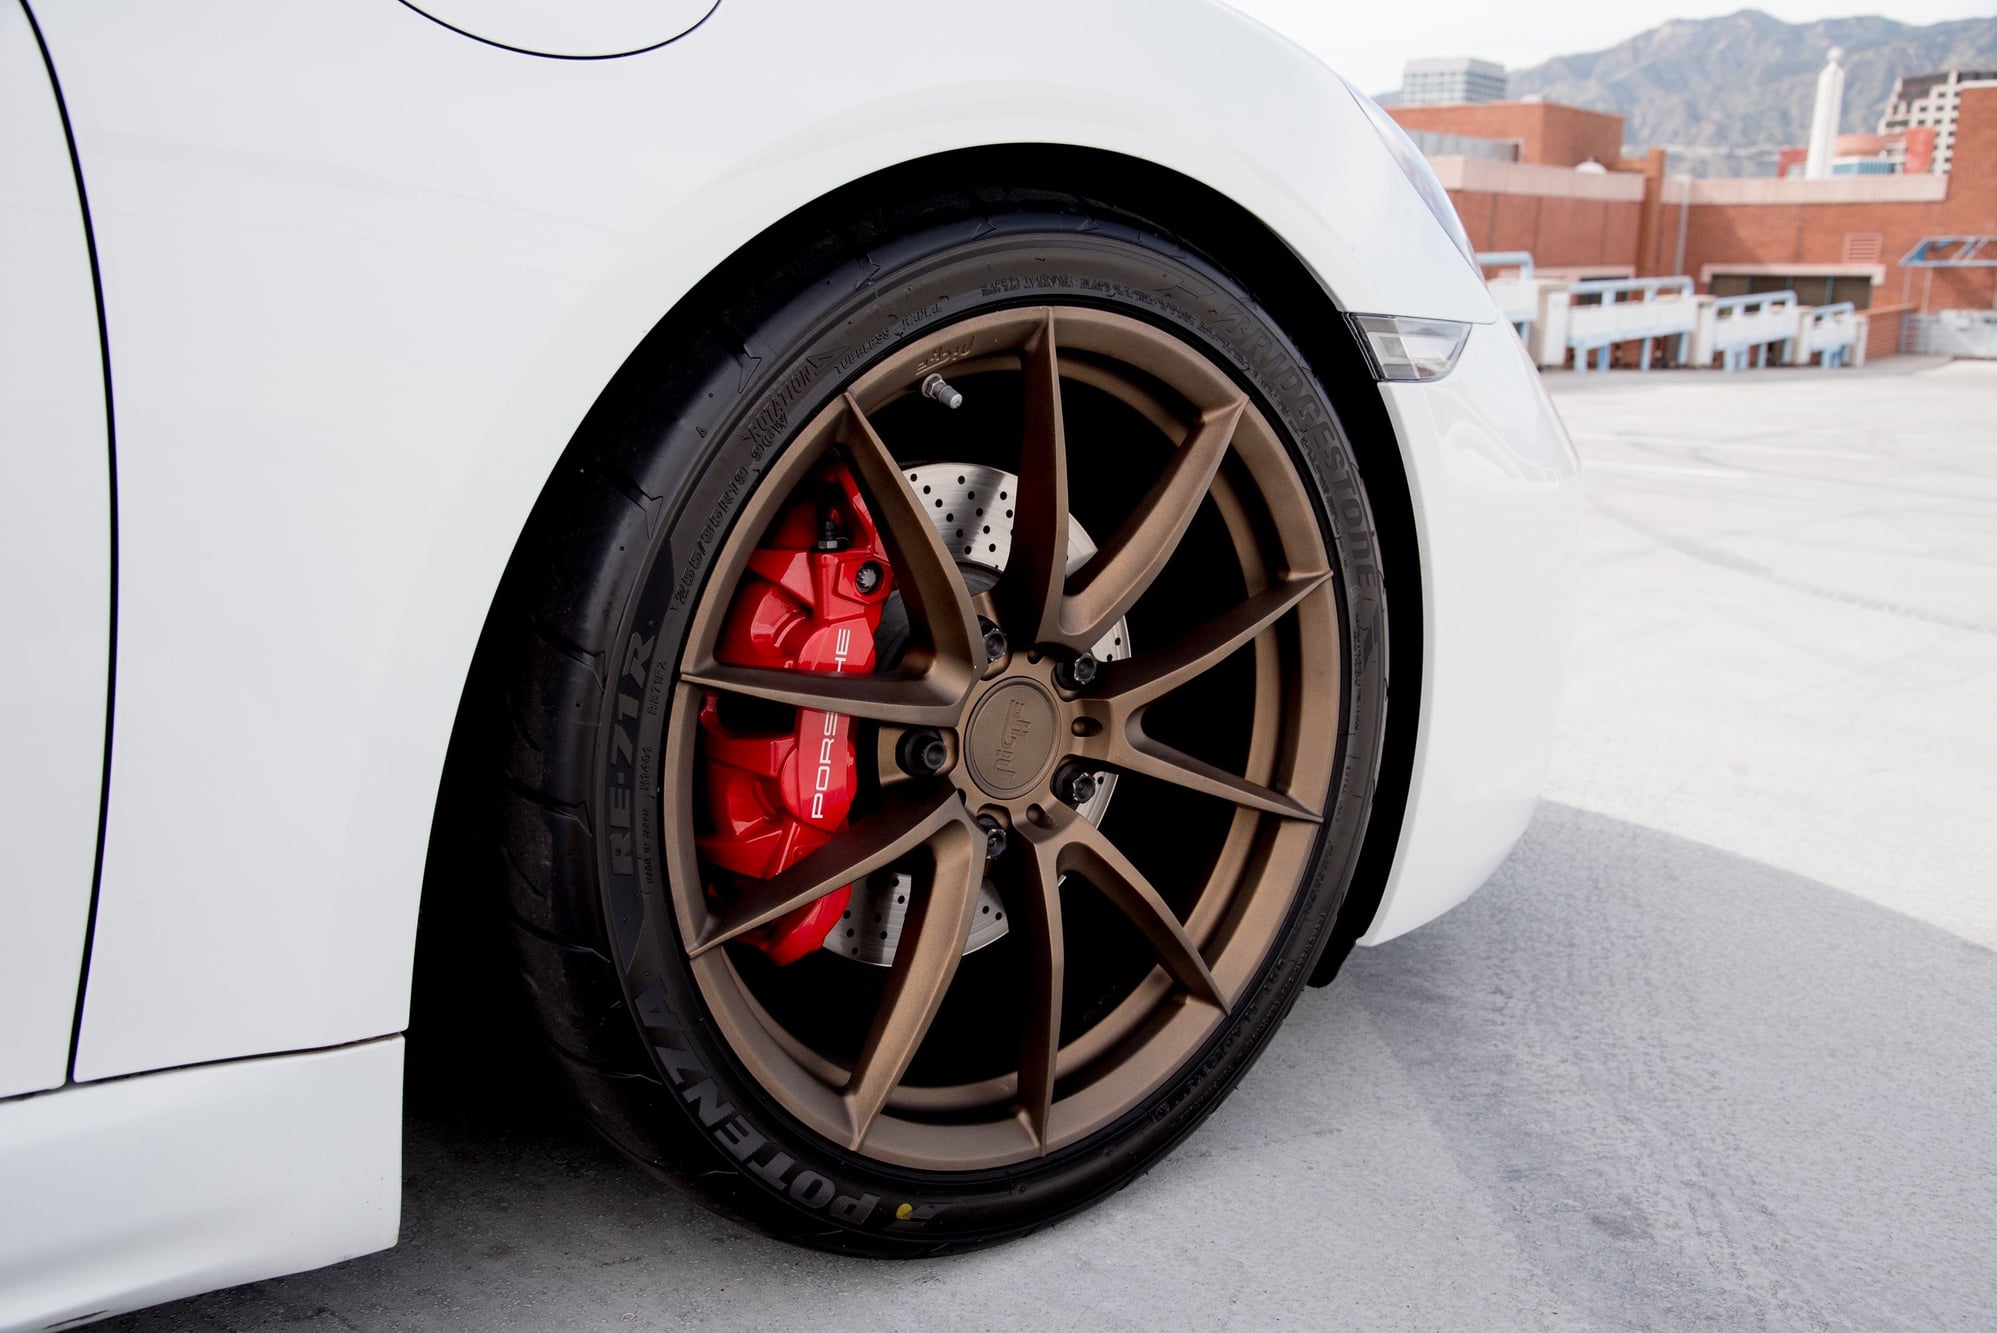 Wheels and Tires/Axles - Niche Sector forged wheels for 718 fitment - Used - Glendale, CA 91206, United States